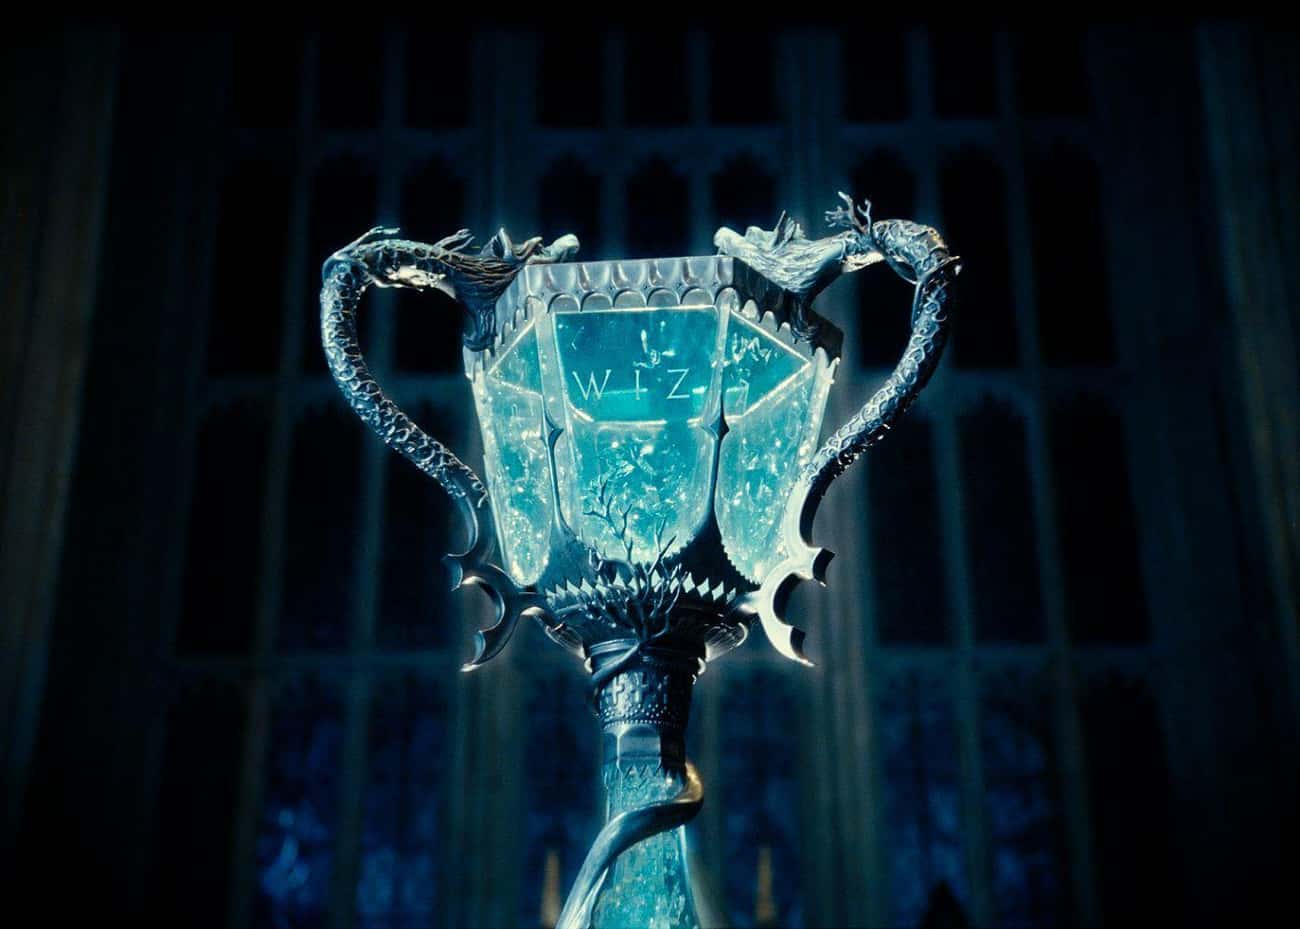 1294: The First Triwizard Tournament Takes Place 